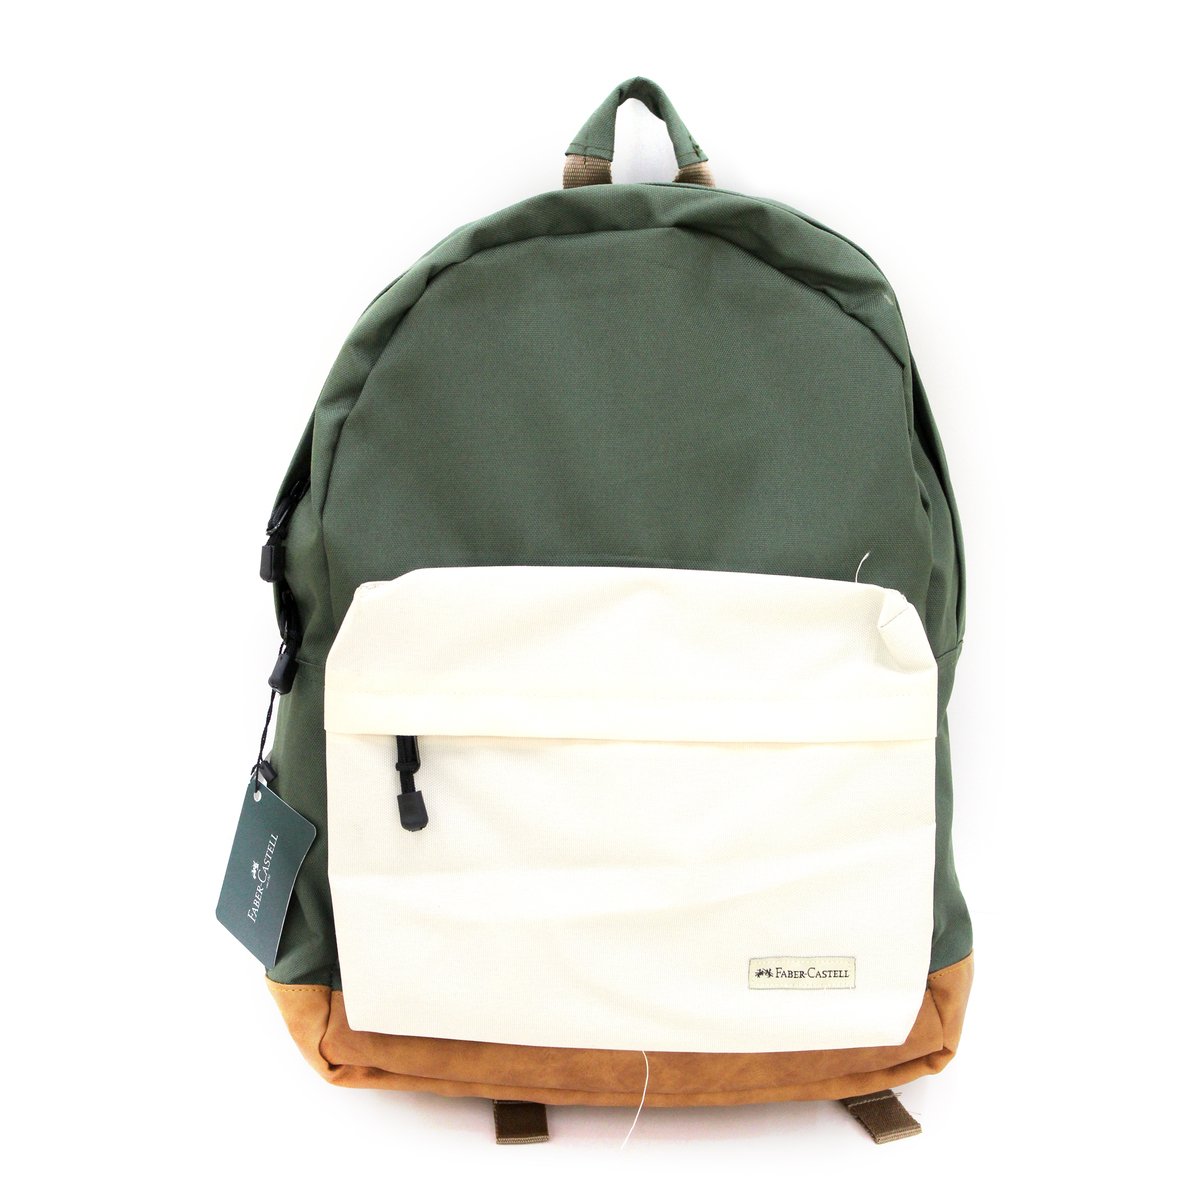 Faber-Castell Backpack Delta Green Army